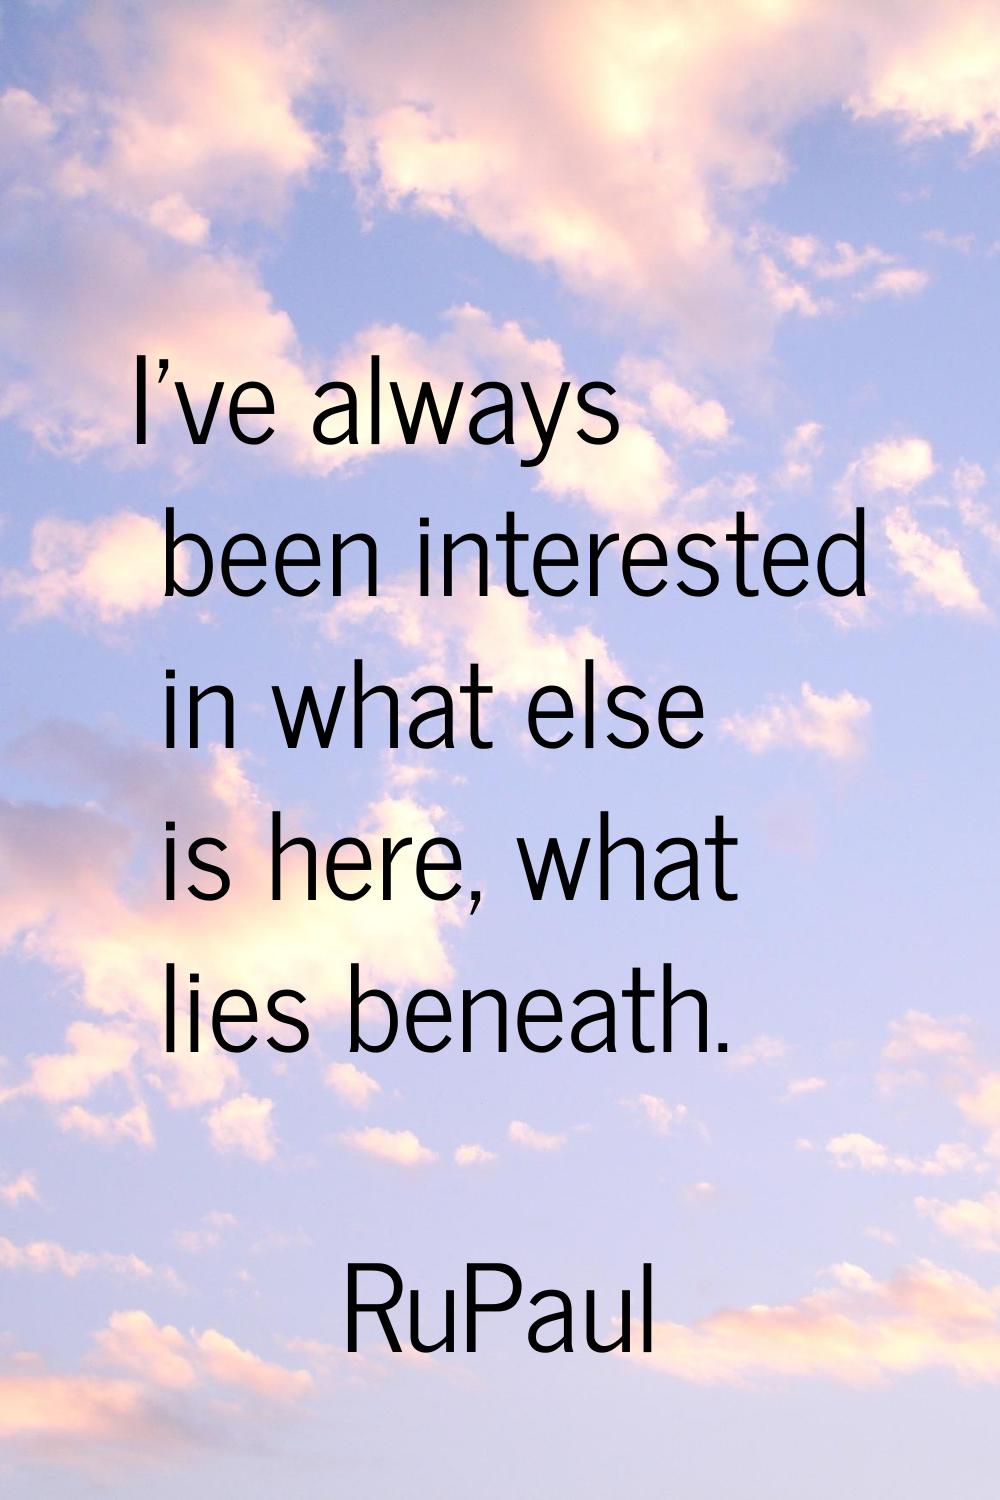 I've always been interested in what else is here, what lies beneath.